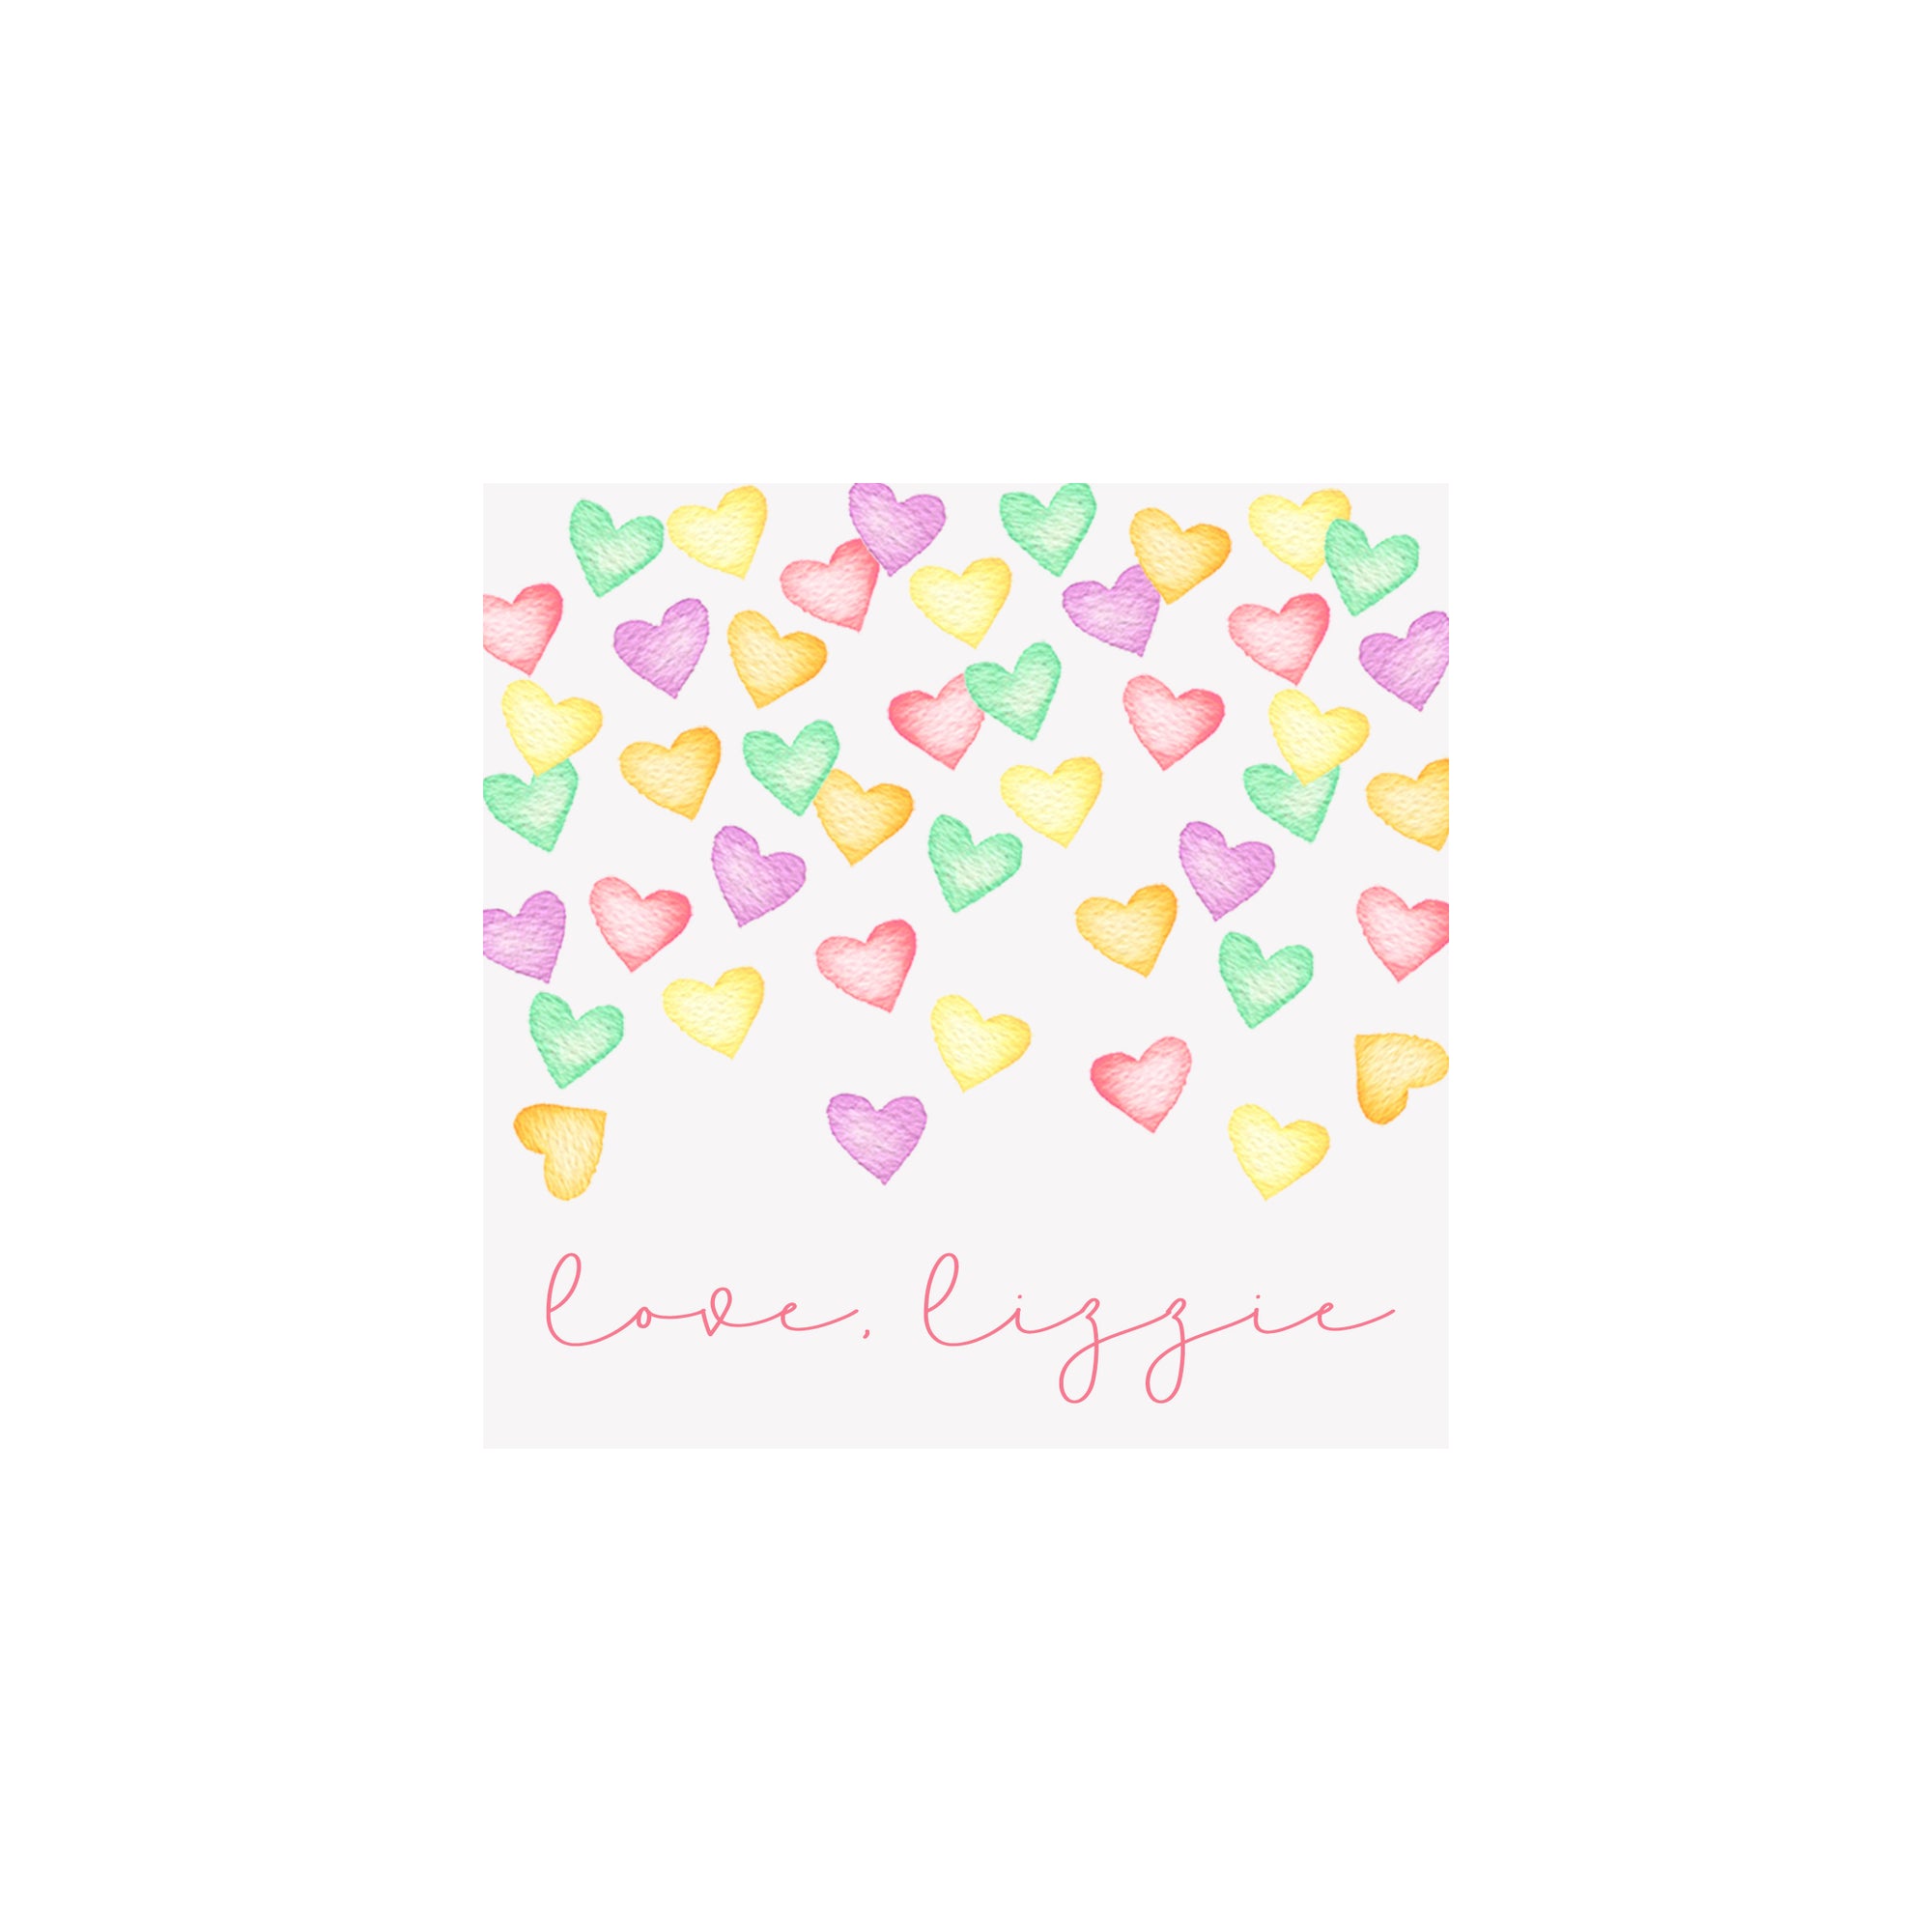 Conversation Hearts Gift Tags & Stickers